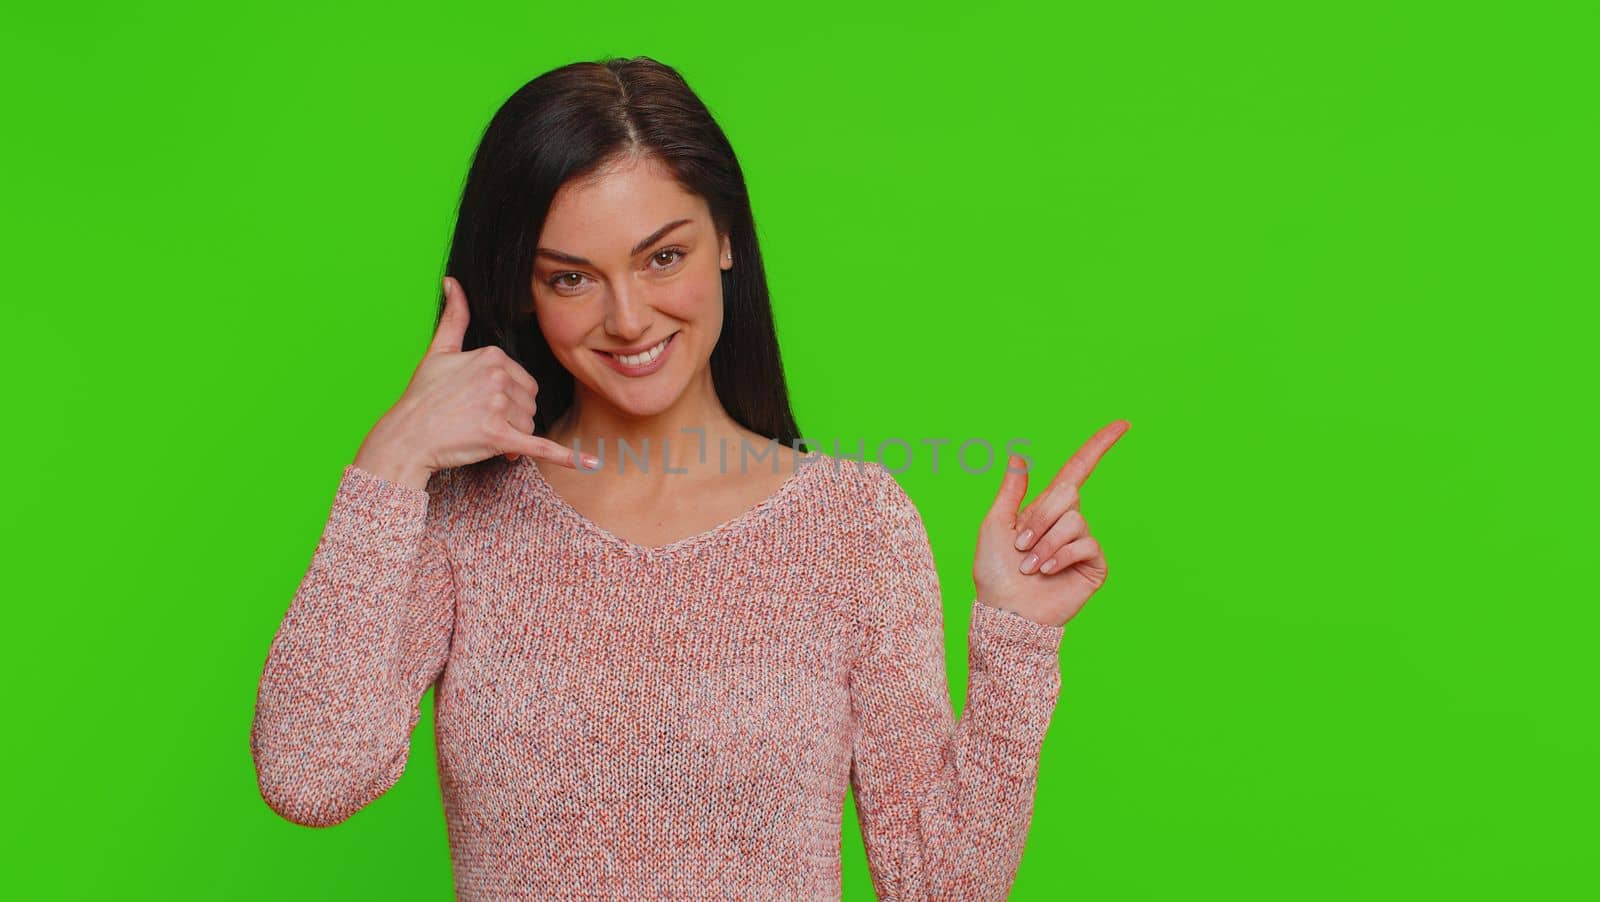 Call us, here is contact number. Young woman looking at camera doing phone gesture like says hey you call me back, conversation. Girl showing advertising area isolated on green chroma key background